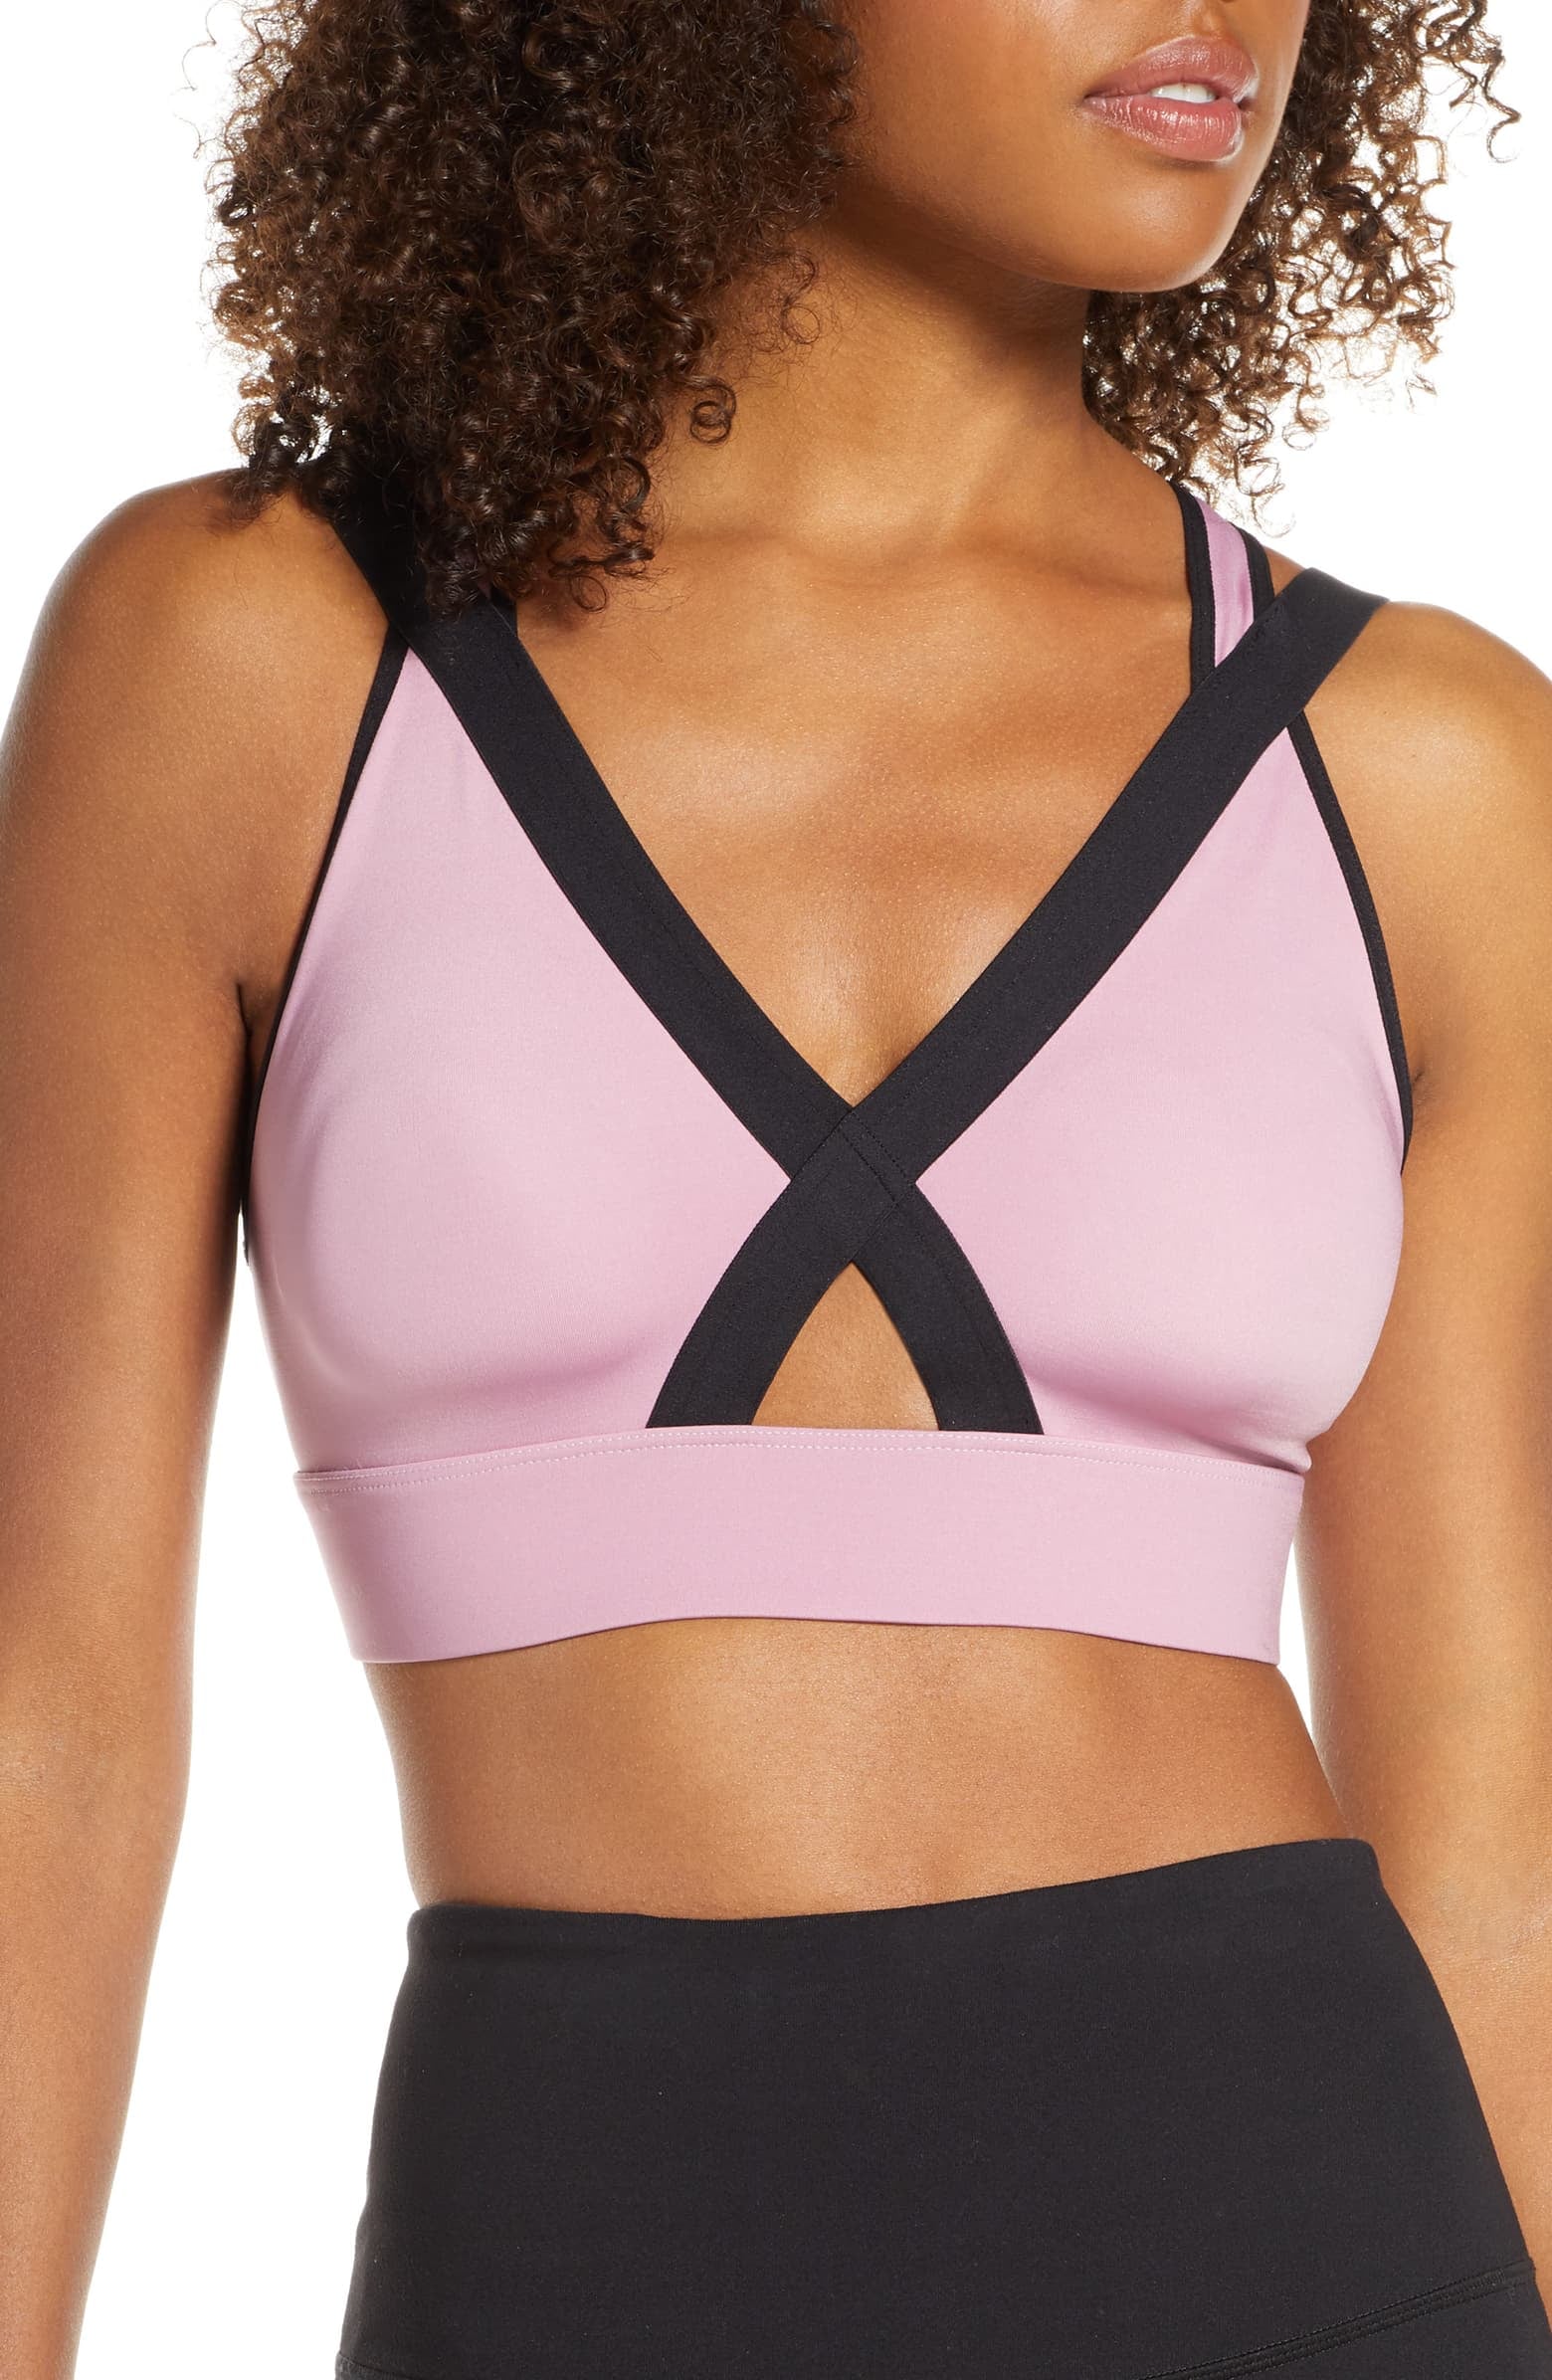 Zella Body Agility Sports Bra, 50 Sports Bras We'd Recommend Sweating in,  All $50 or Less